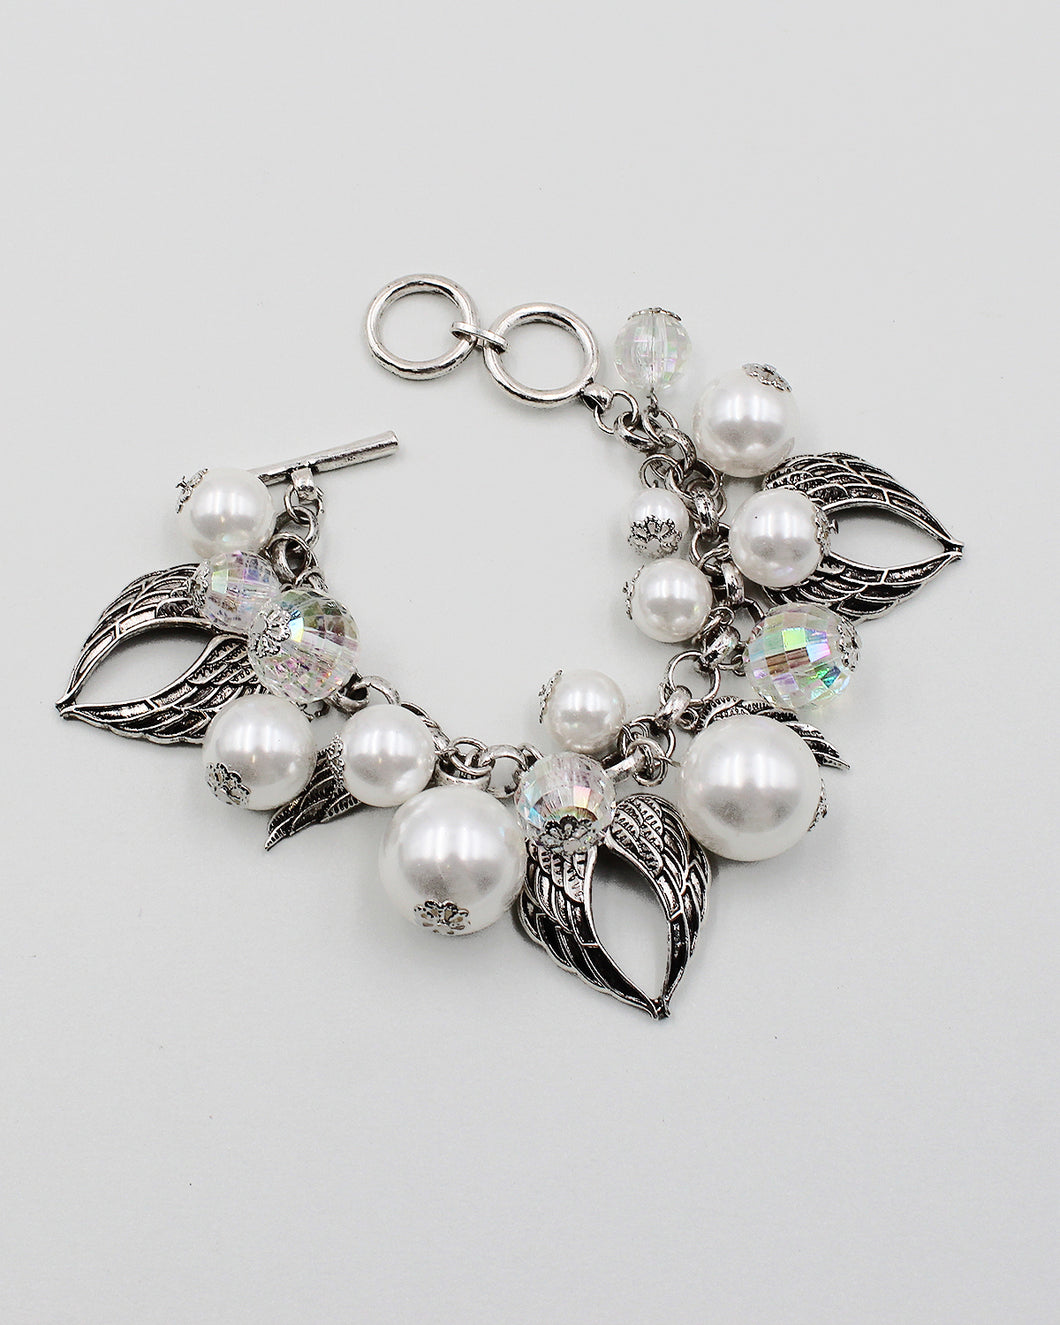 Angel Wing Charm Bracelet with Pearl Beads